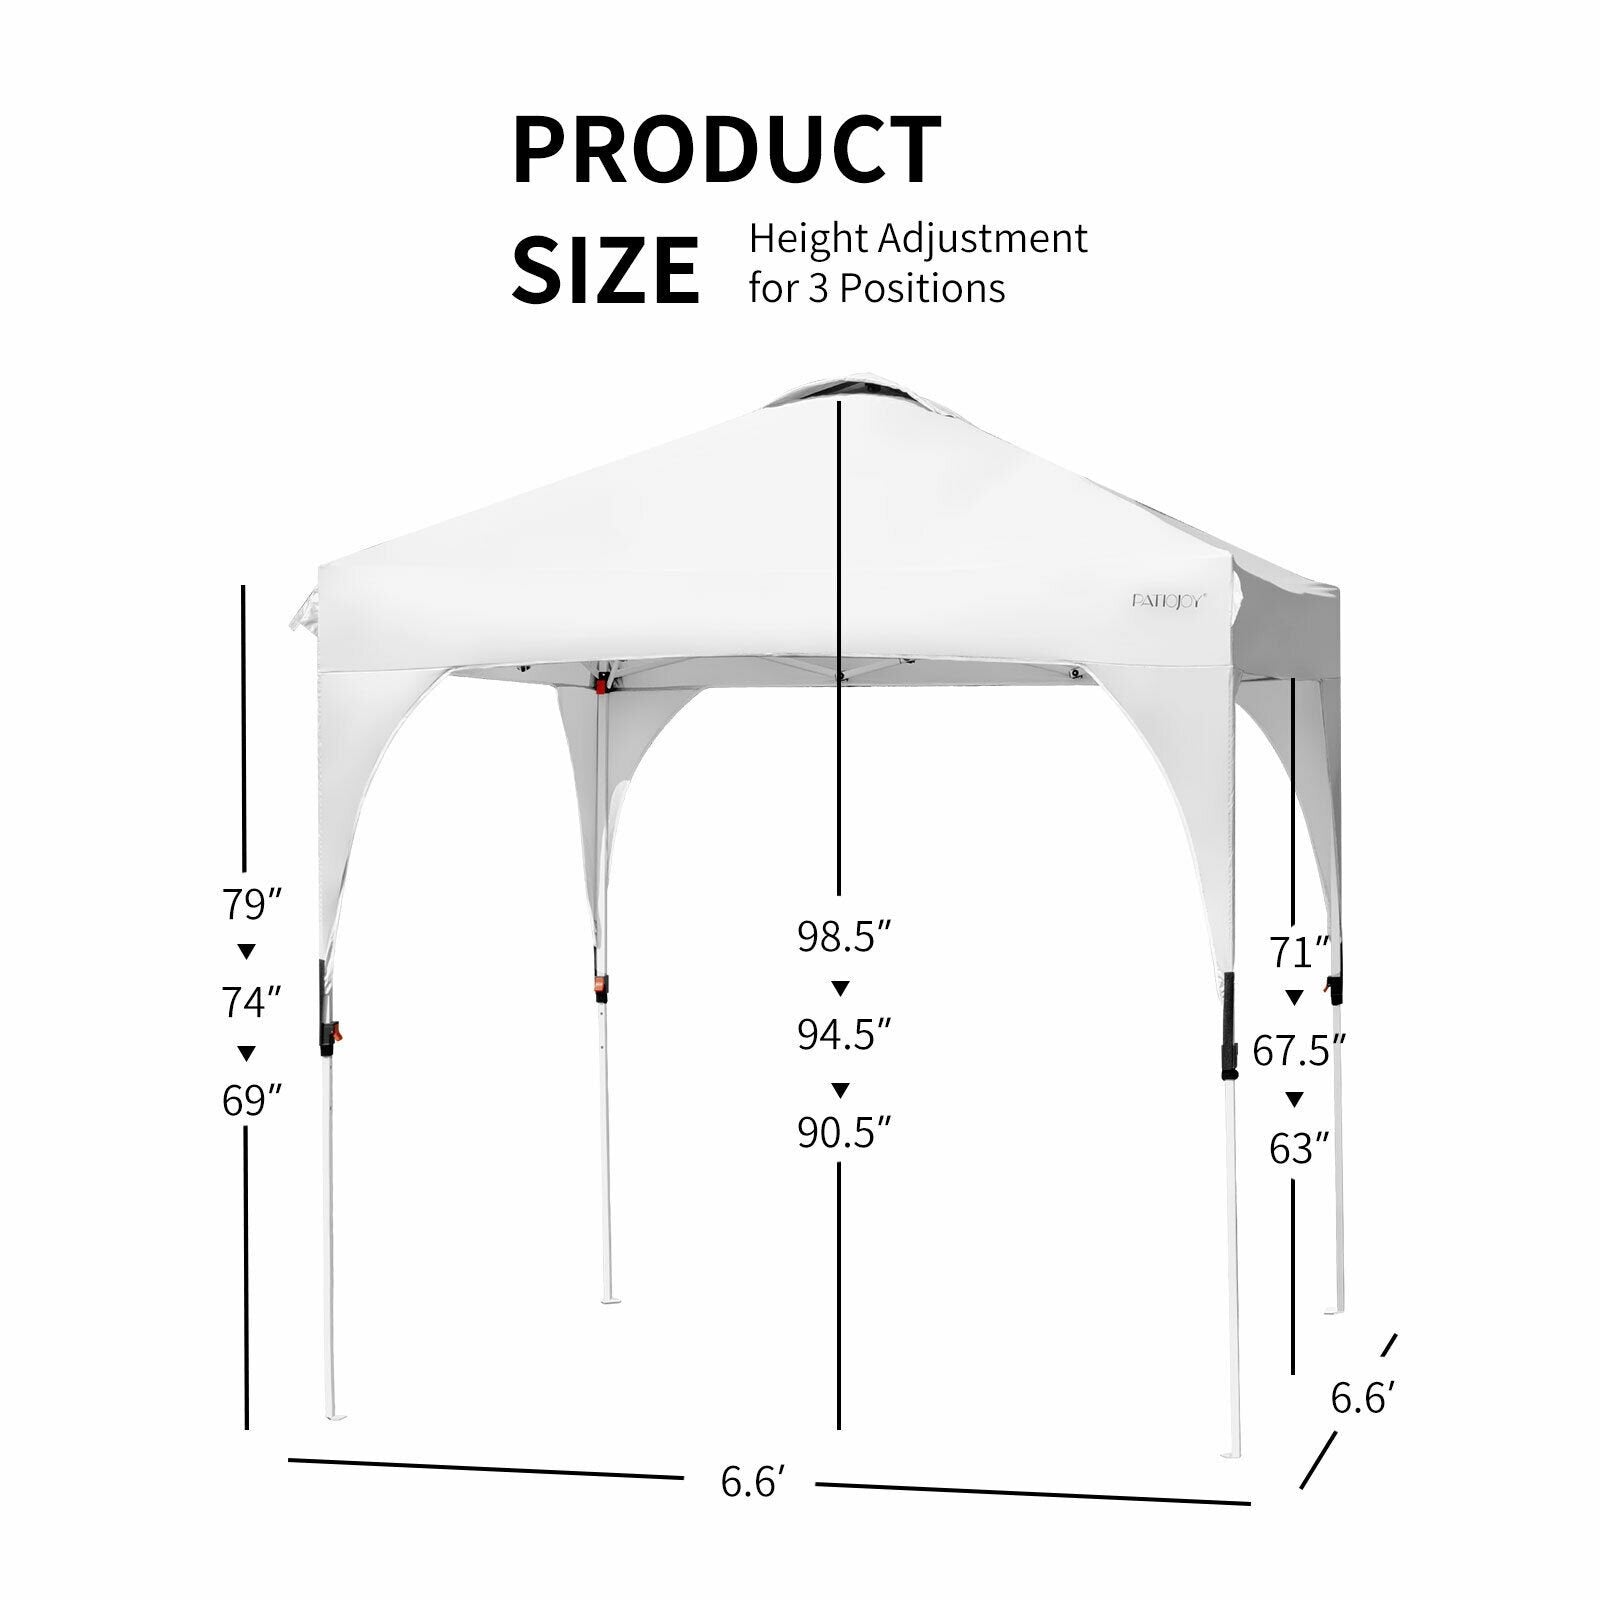 6.6 x 6.6 FT Pop Up Height Adjustable Canopy Tent with Roller Bag, White - Gallery Canada